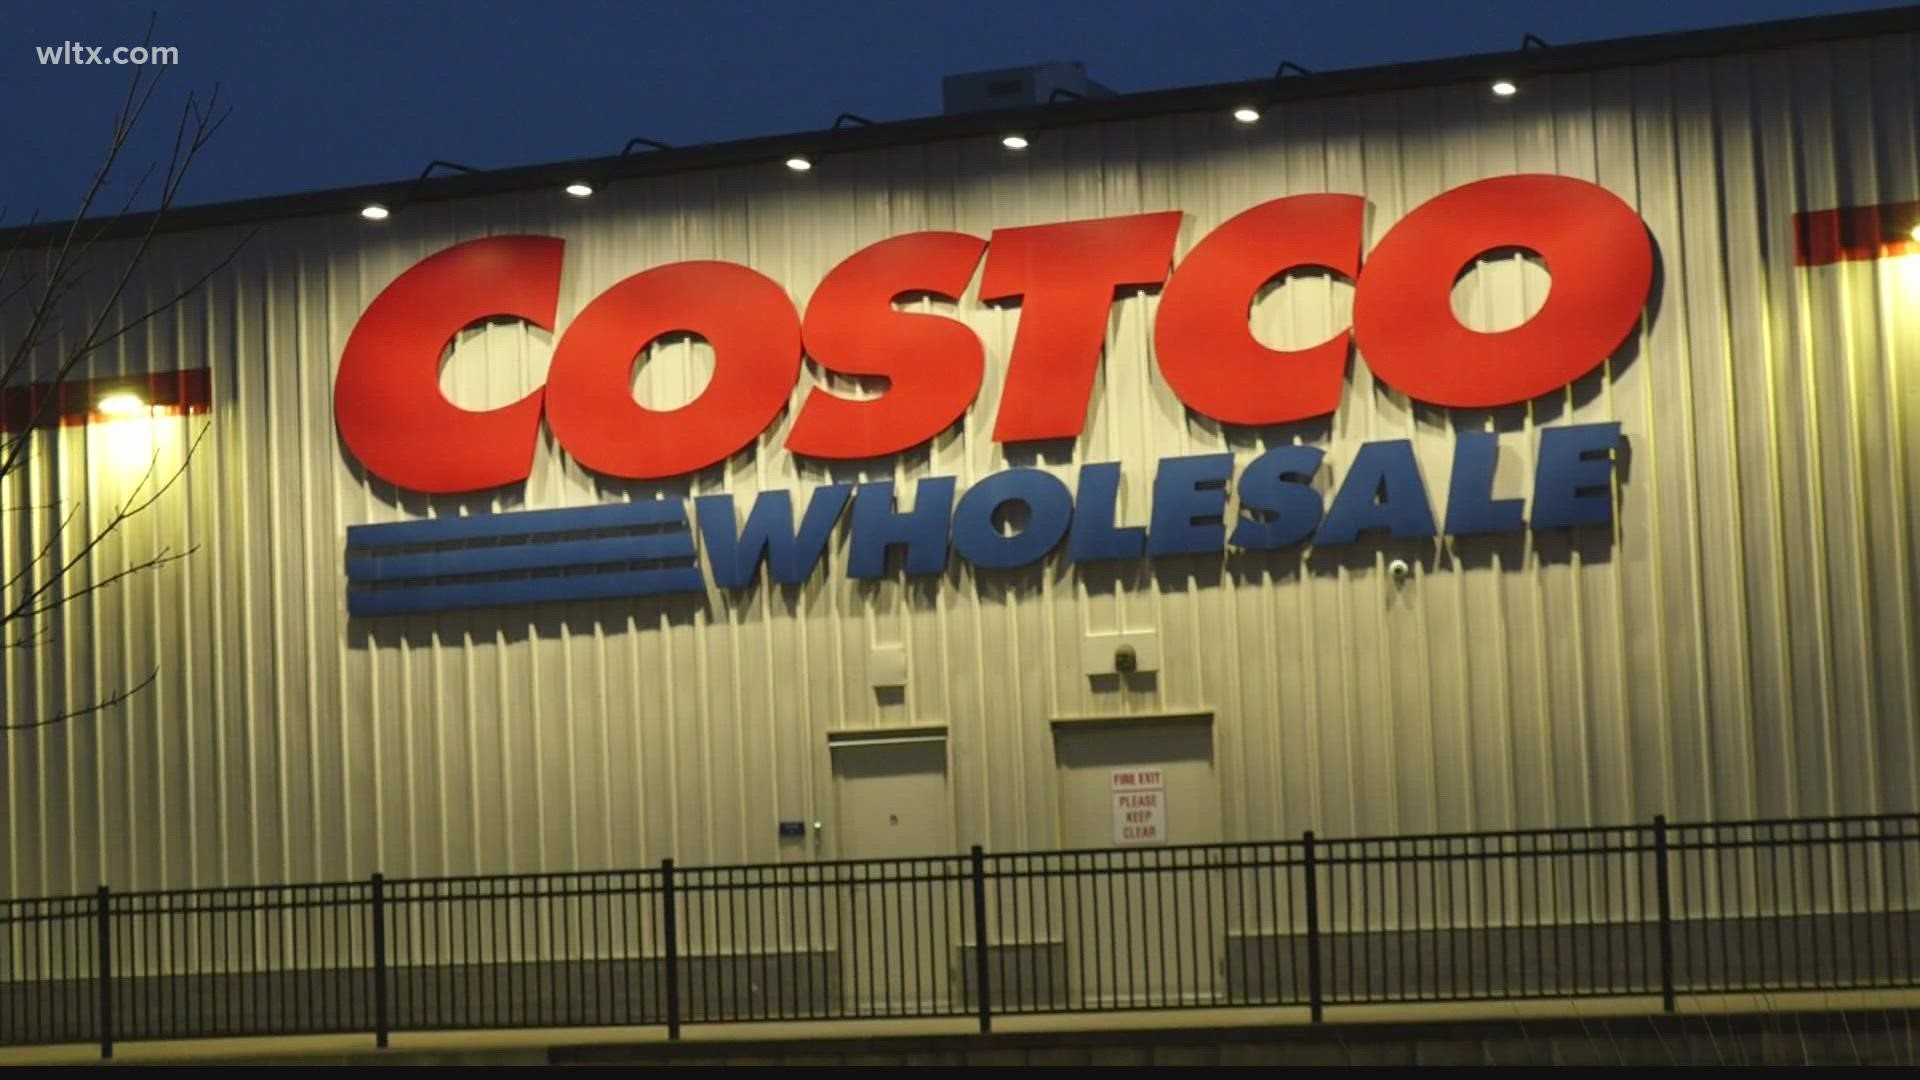 Shoppers concerned after shooting in Harbison Costco parking lot